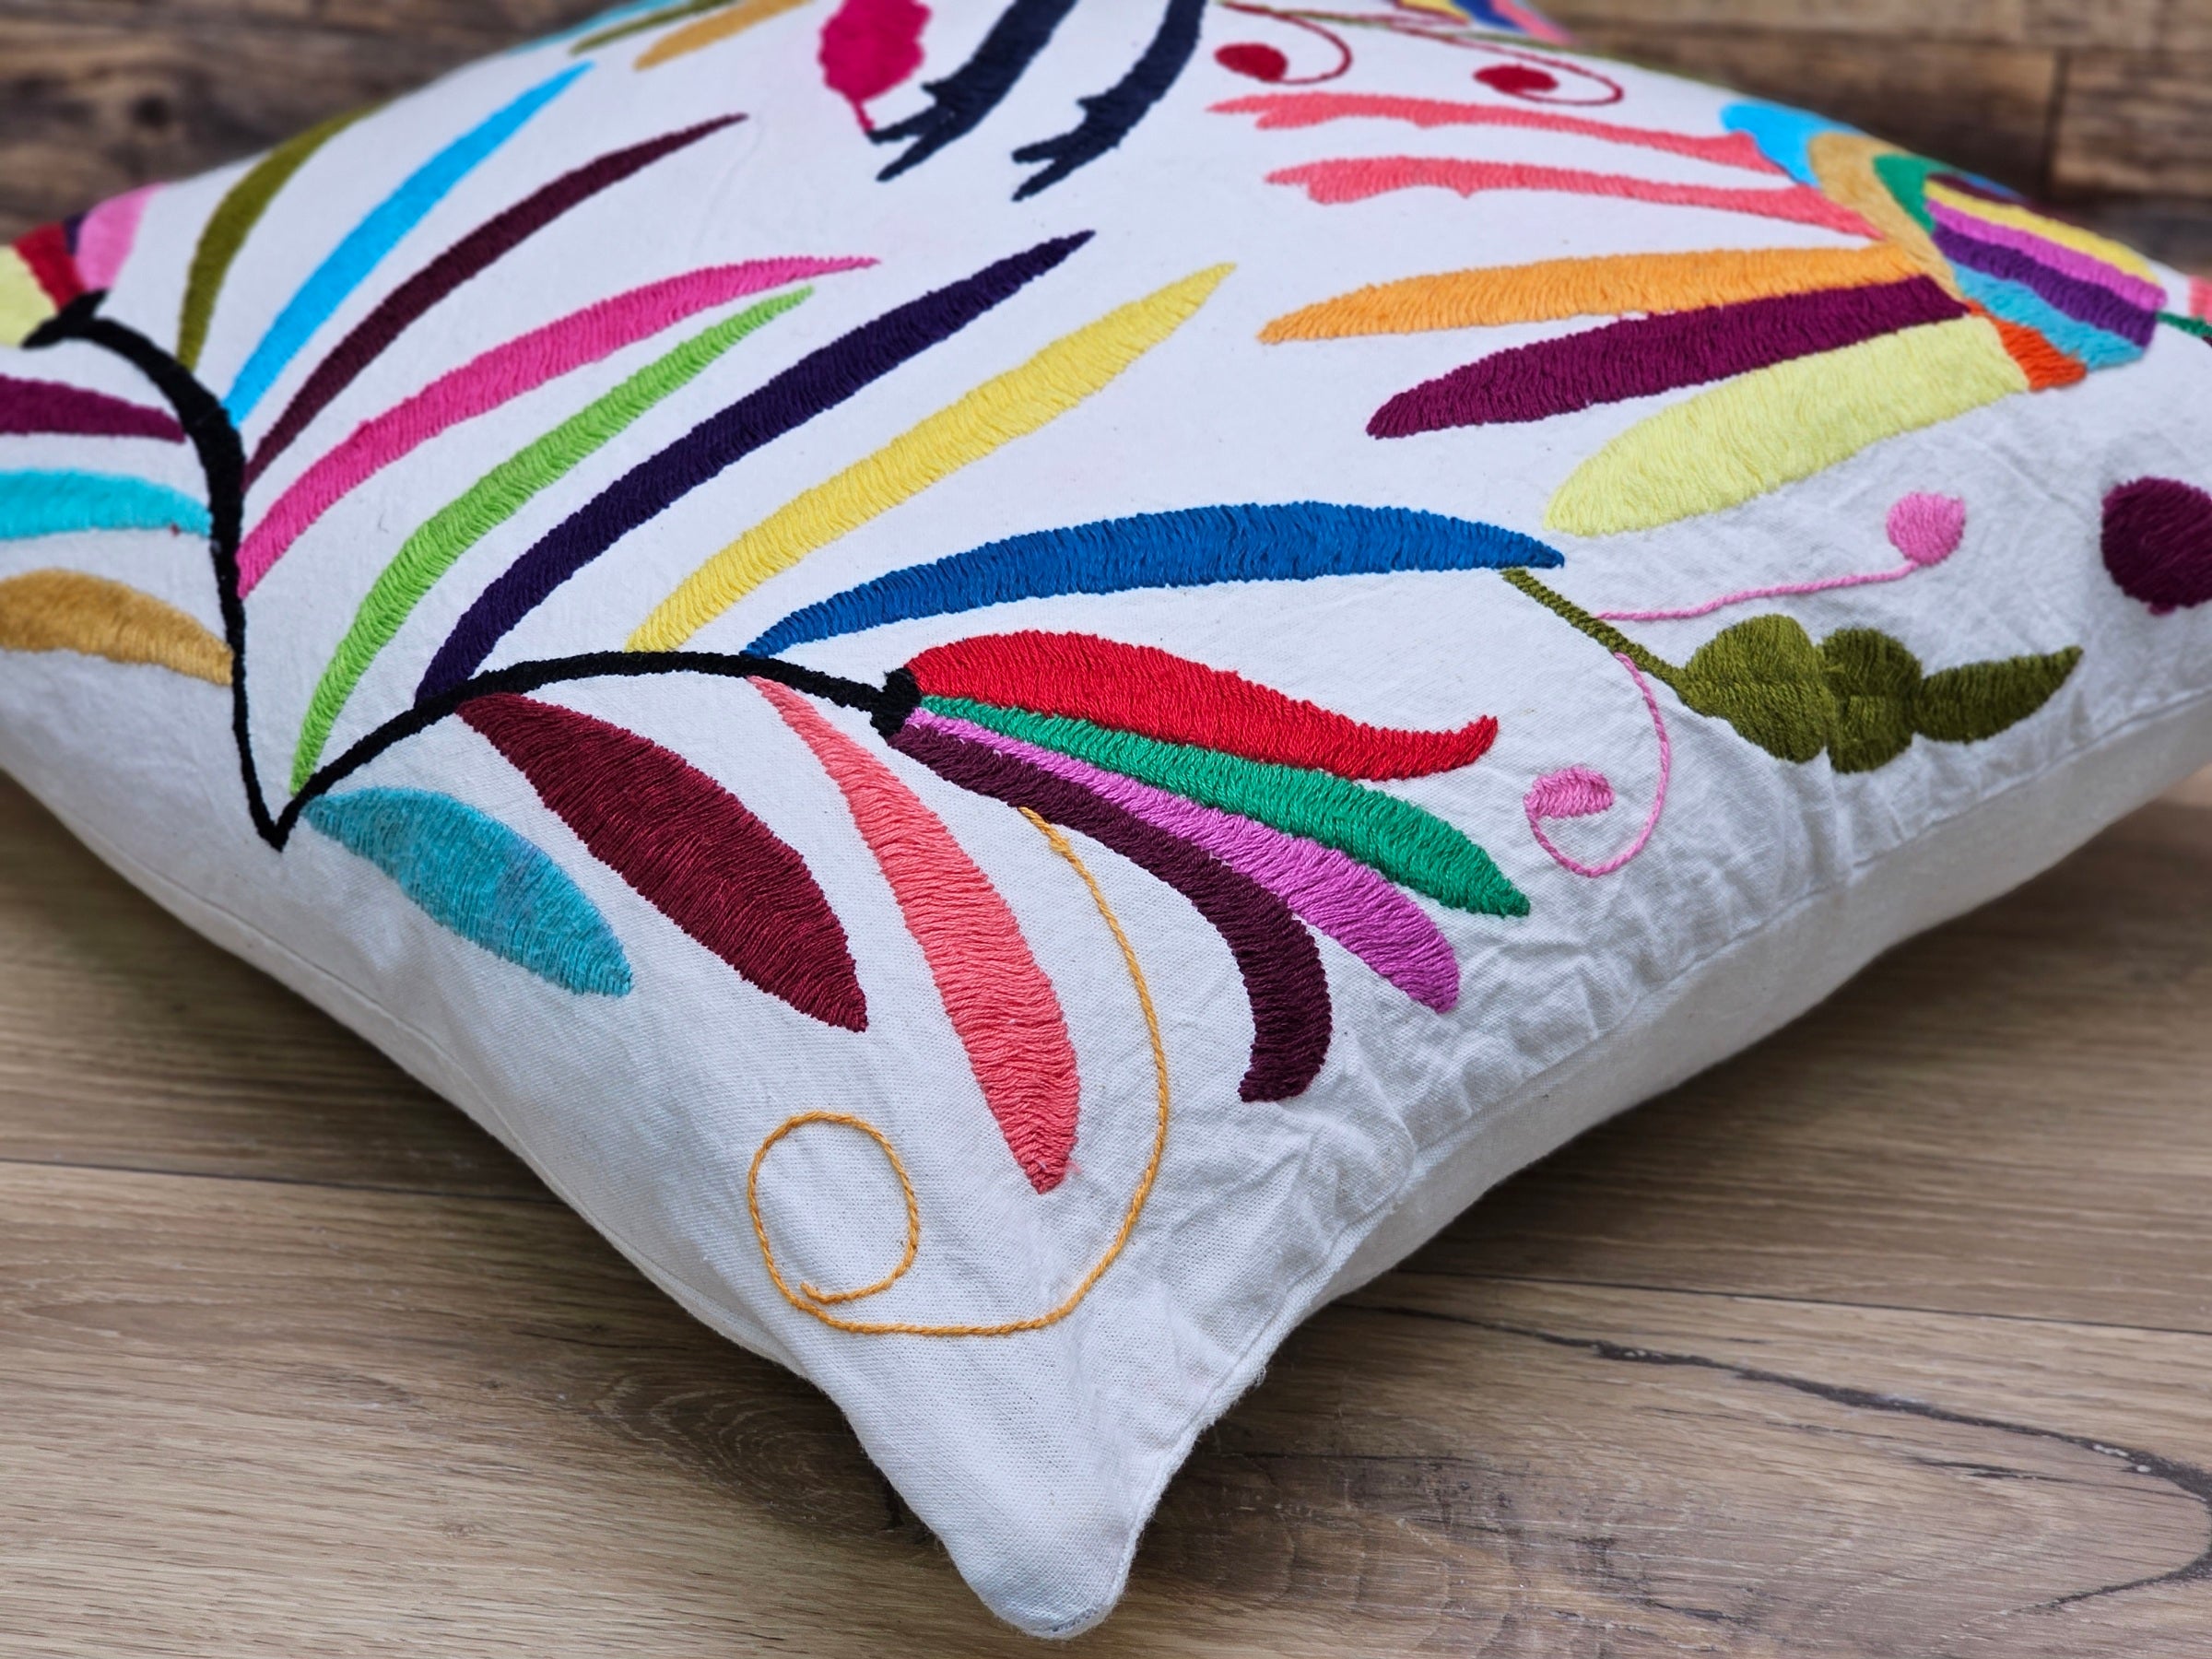 Square Otomi Tenango Pillow Cover with Hand Embroidered Birds and Plants in Vibrant Colors. Handmade in Mexico. Ships from the USA. Buy now at www.felipeandgrace.com.